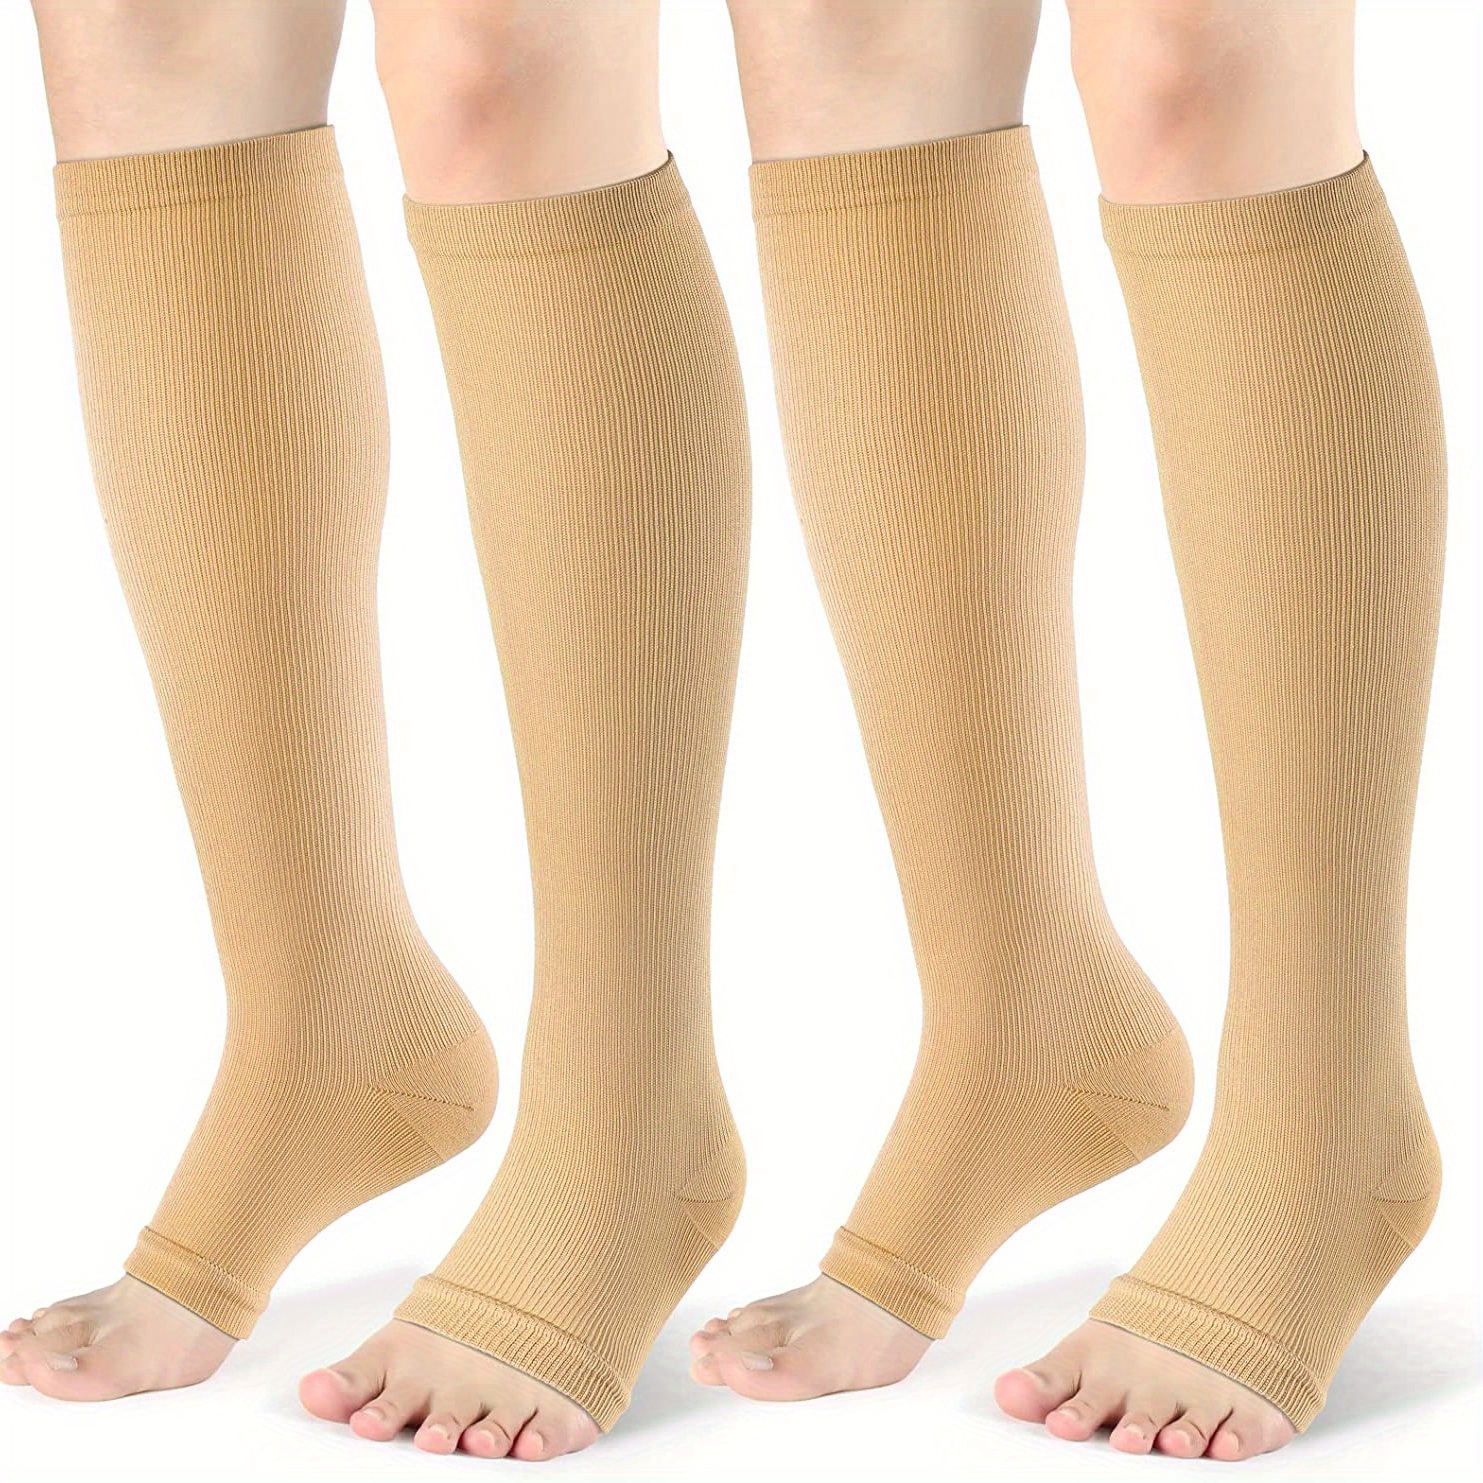 Open Toe Class 3 Pressure Stockings Over the Knee Unisex 34